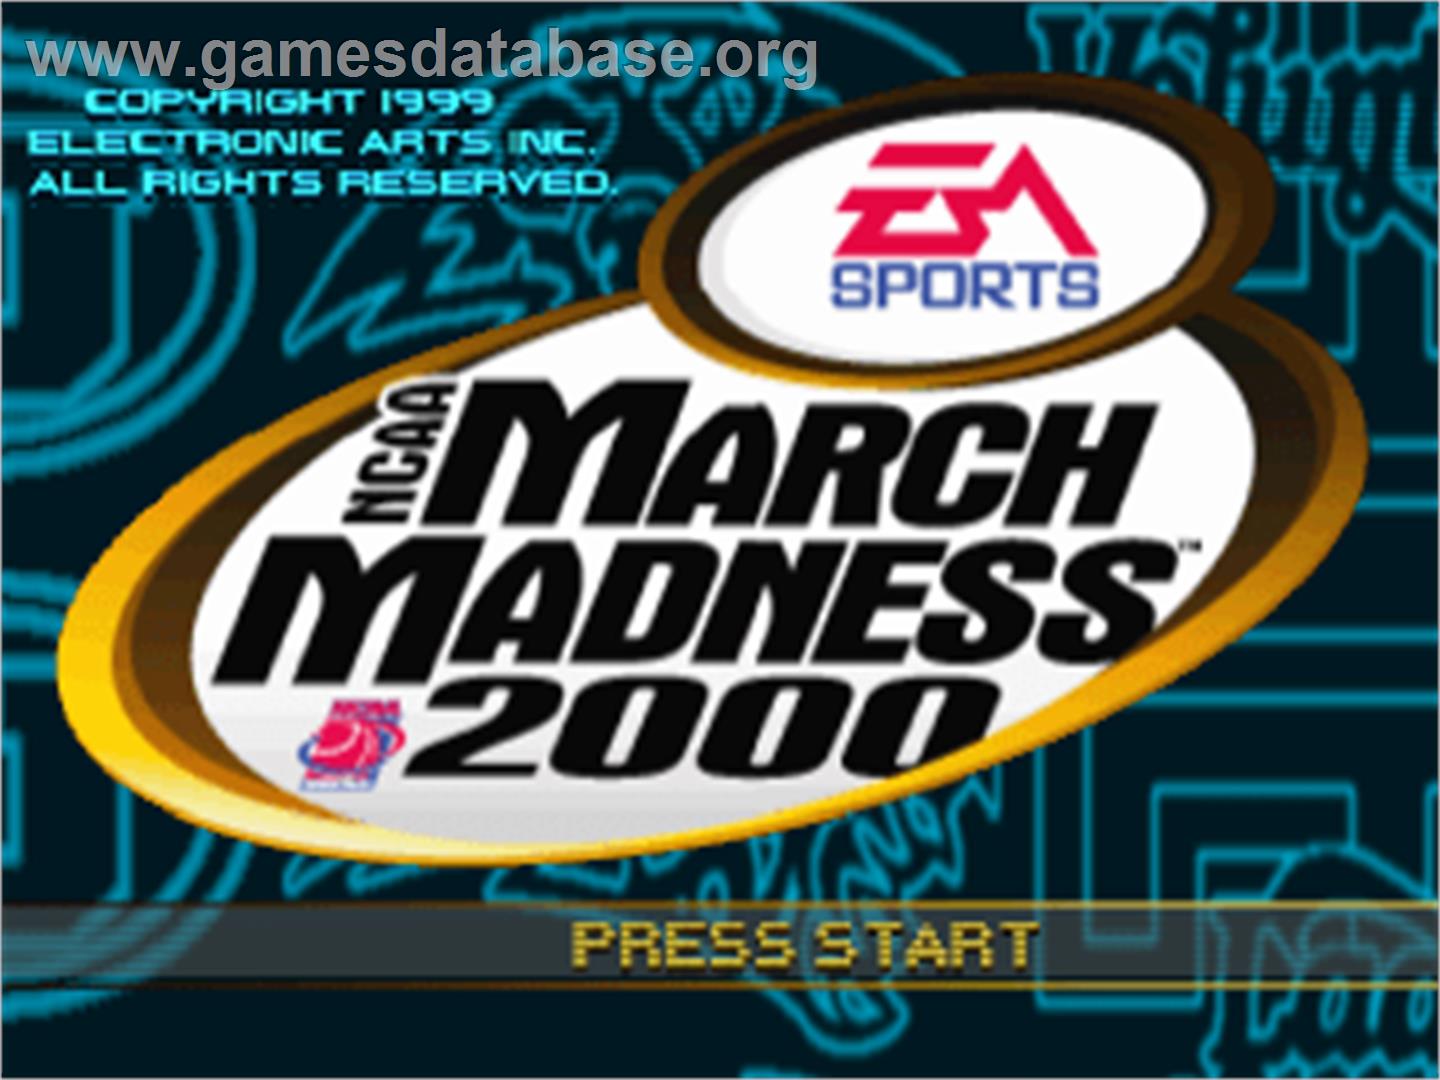 NCAA March Madness 2000 - Sony Playstation - Artwork - Title Screen